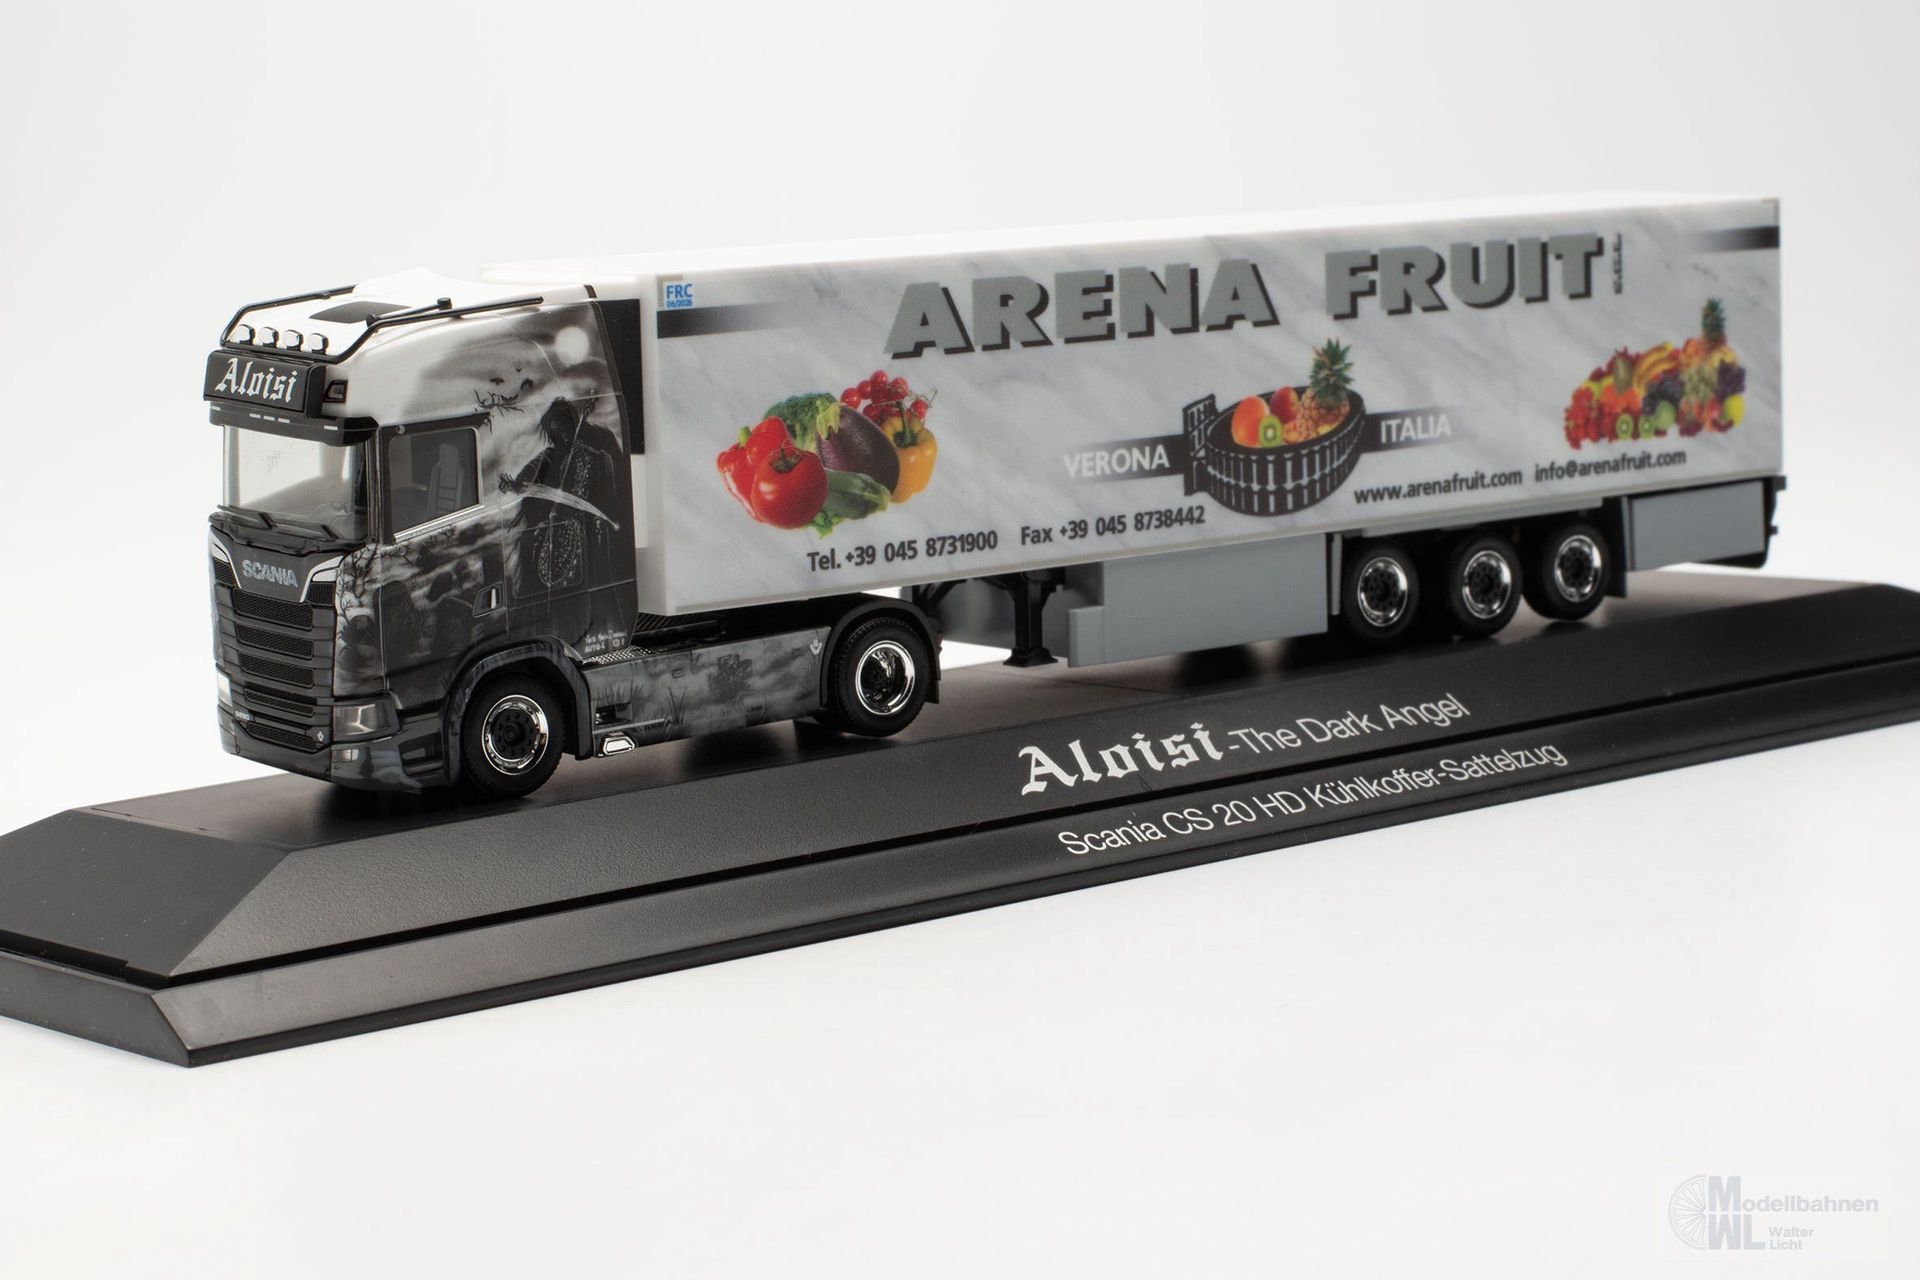 Herpa 122269 - Scania CS 20 Kühlcontainer-Sz Arena Fr H0 1:87